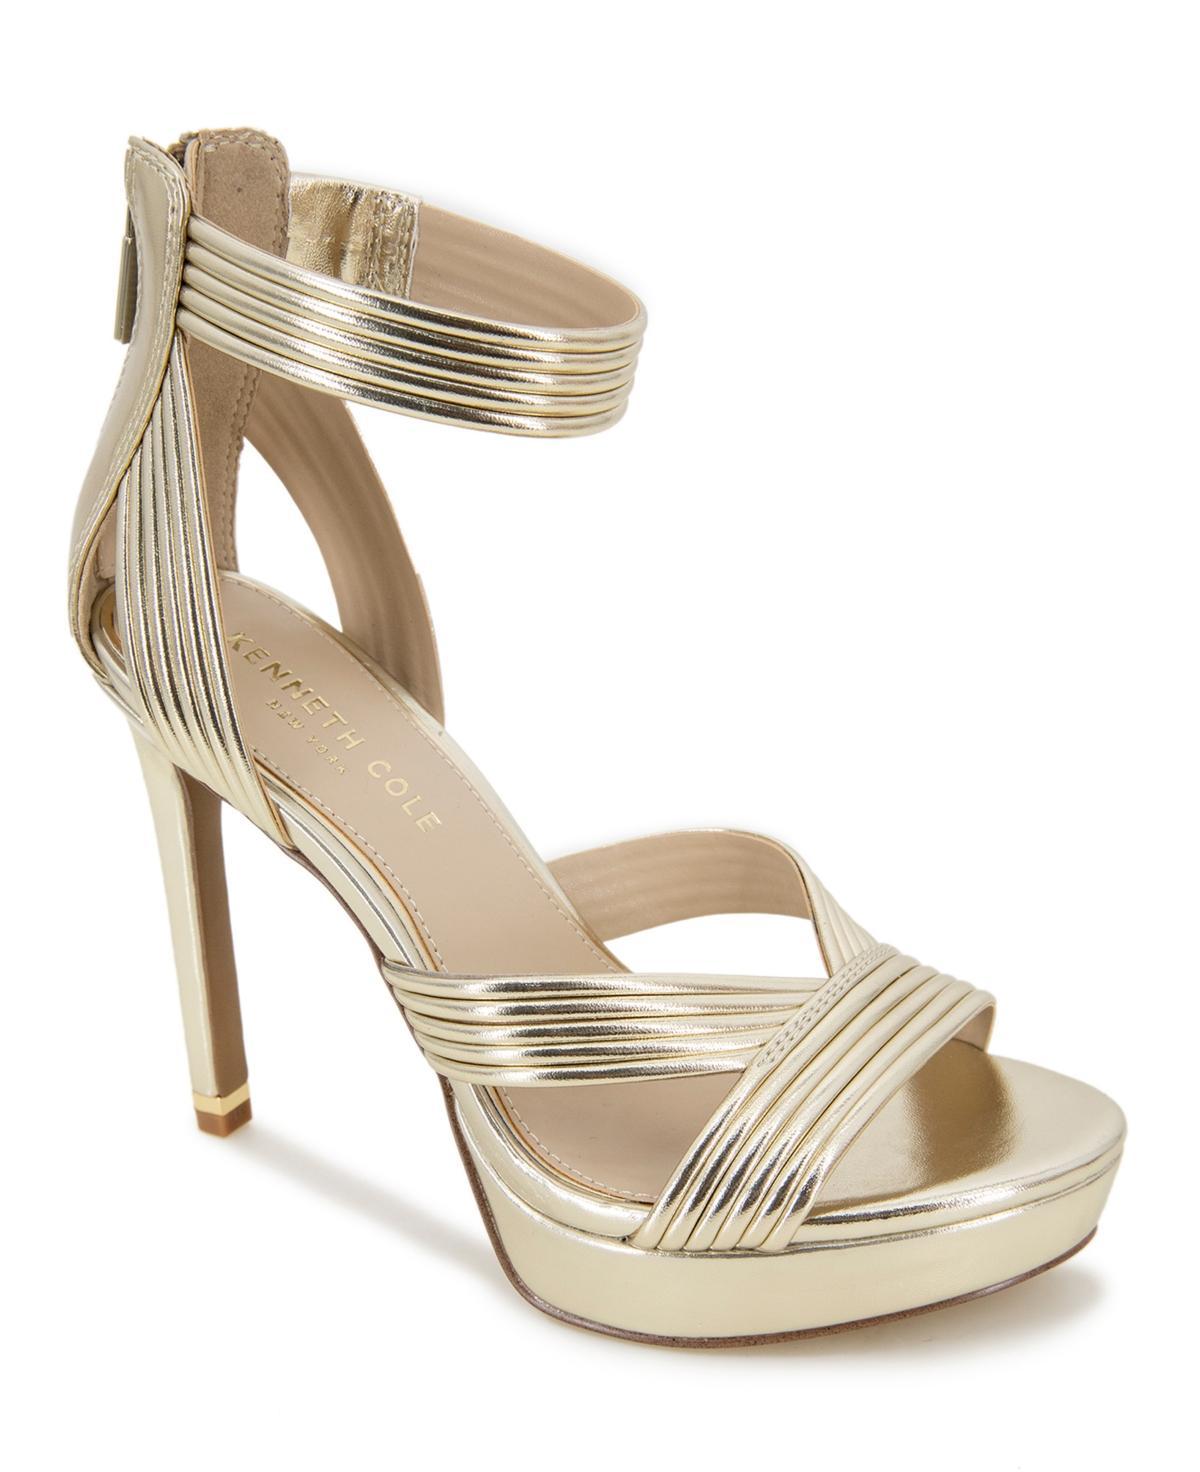 Kenneth Cole New York Womens Strappy Nadine Sandals Womens Shoes Product Image